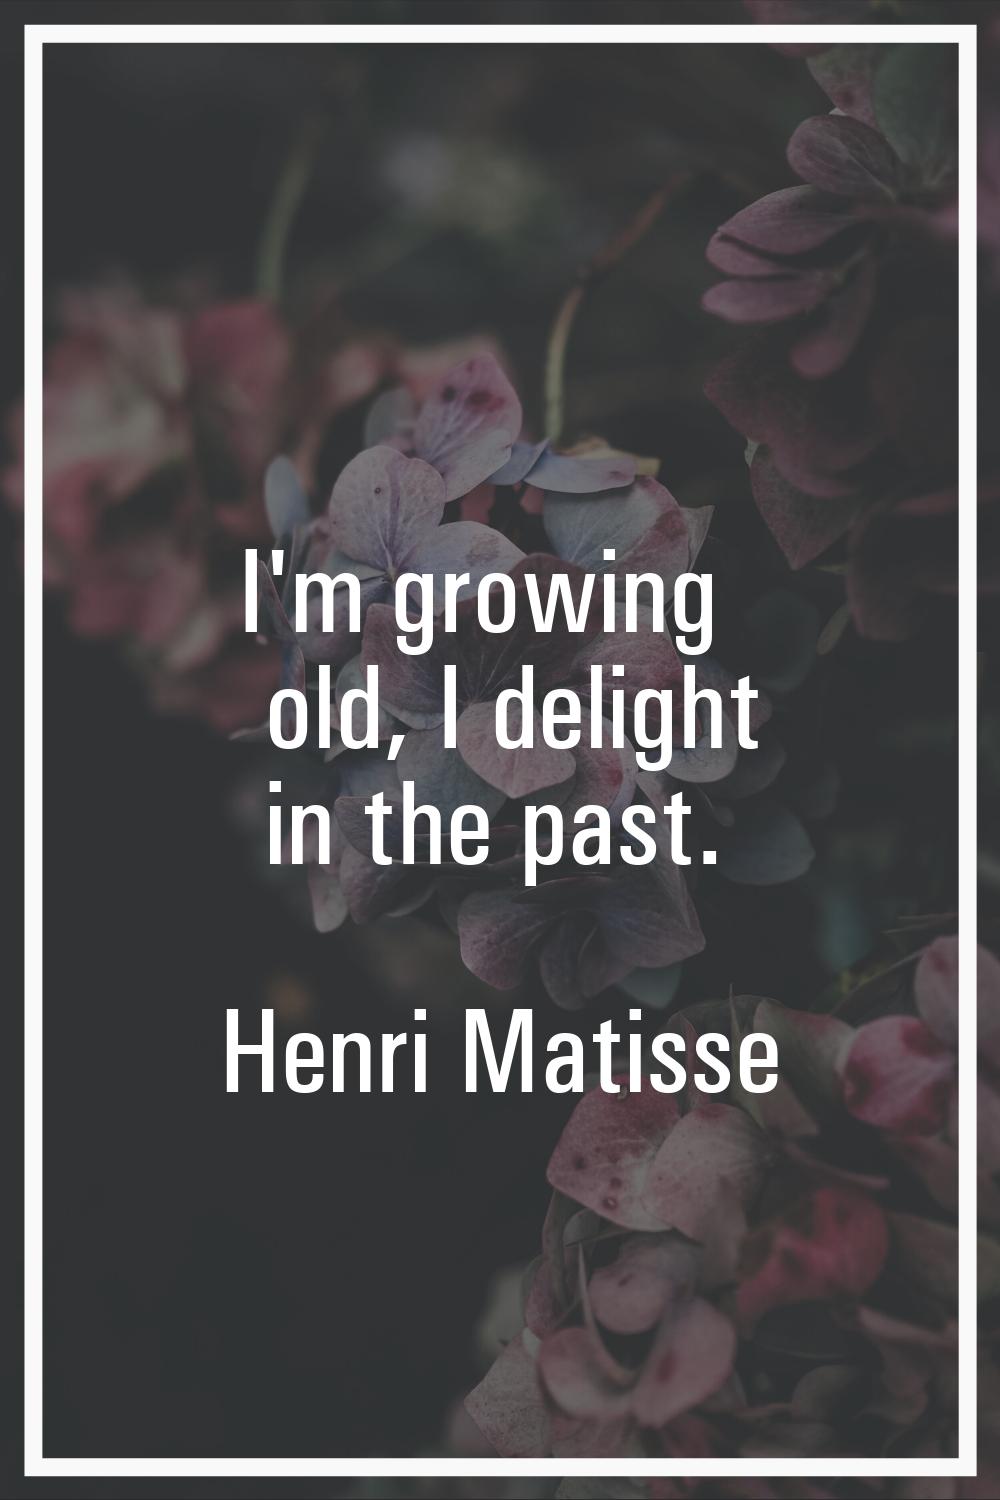 I'm growing old, I delight in the past.